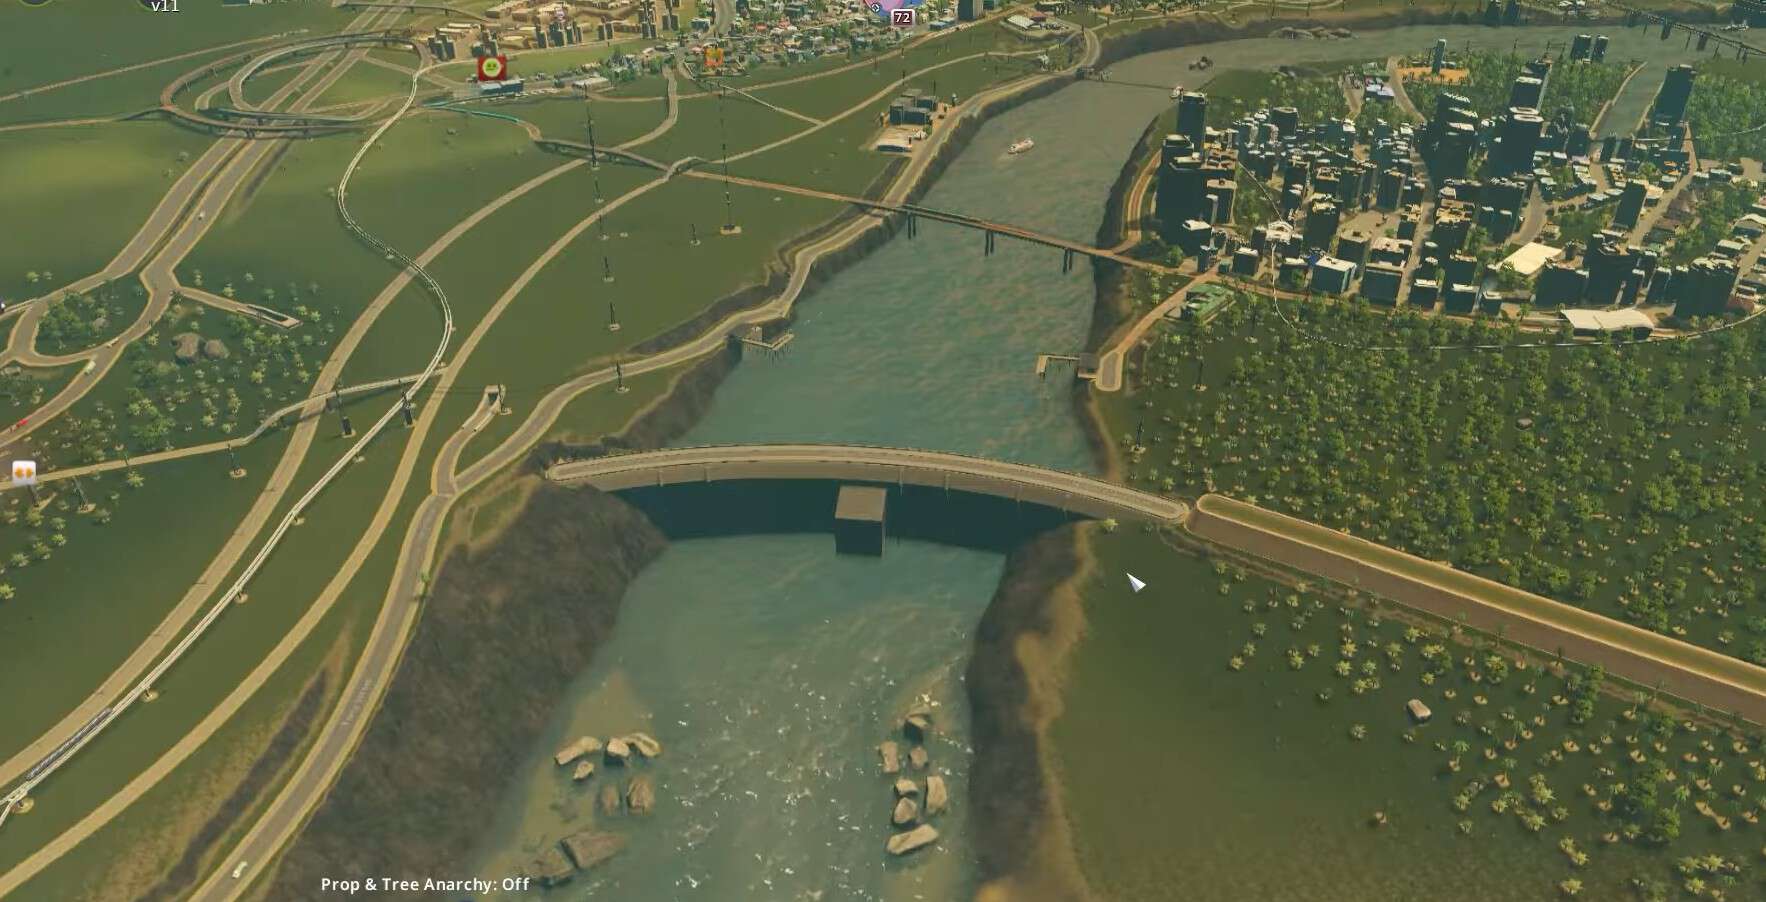 Hydro Electric Power Plant (Dam) in Cities Skylines